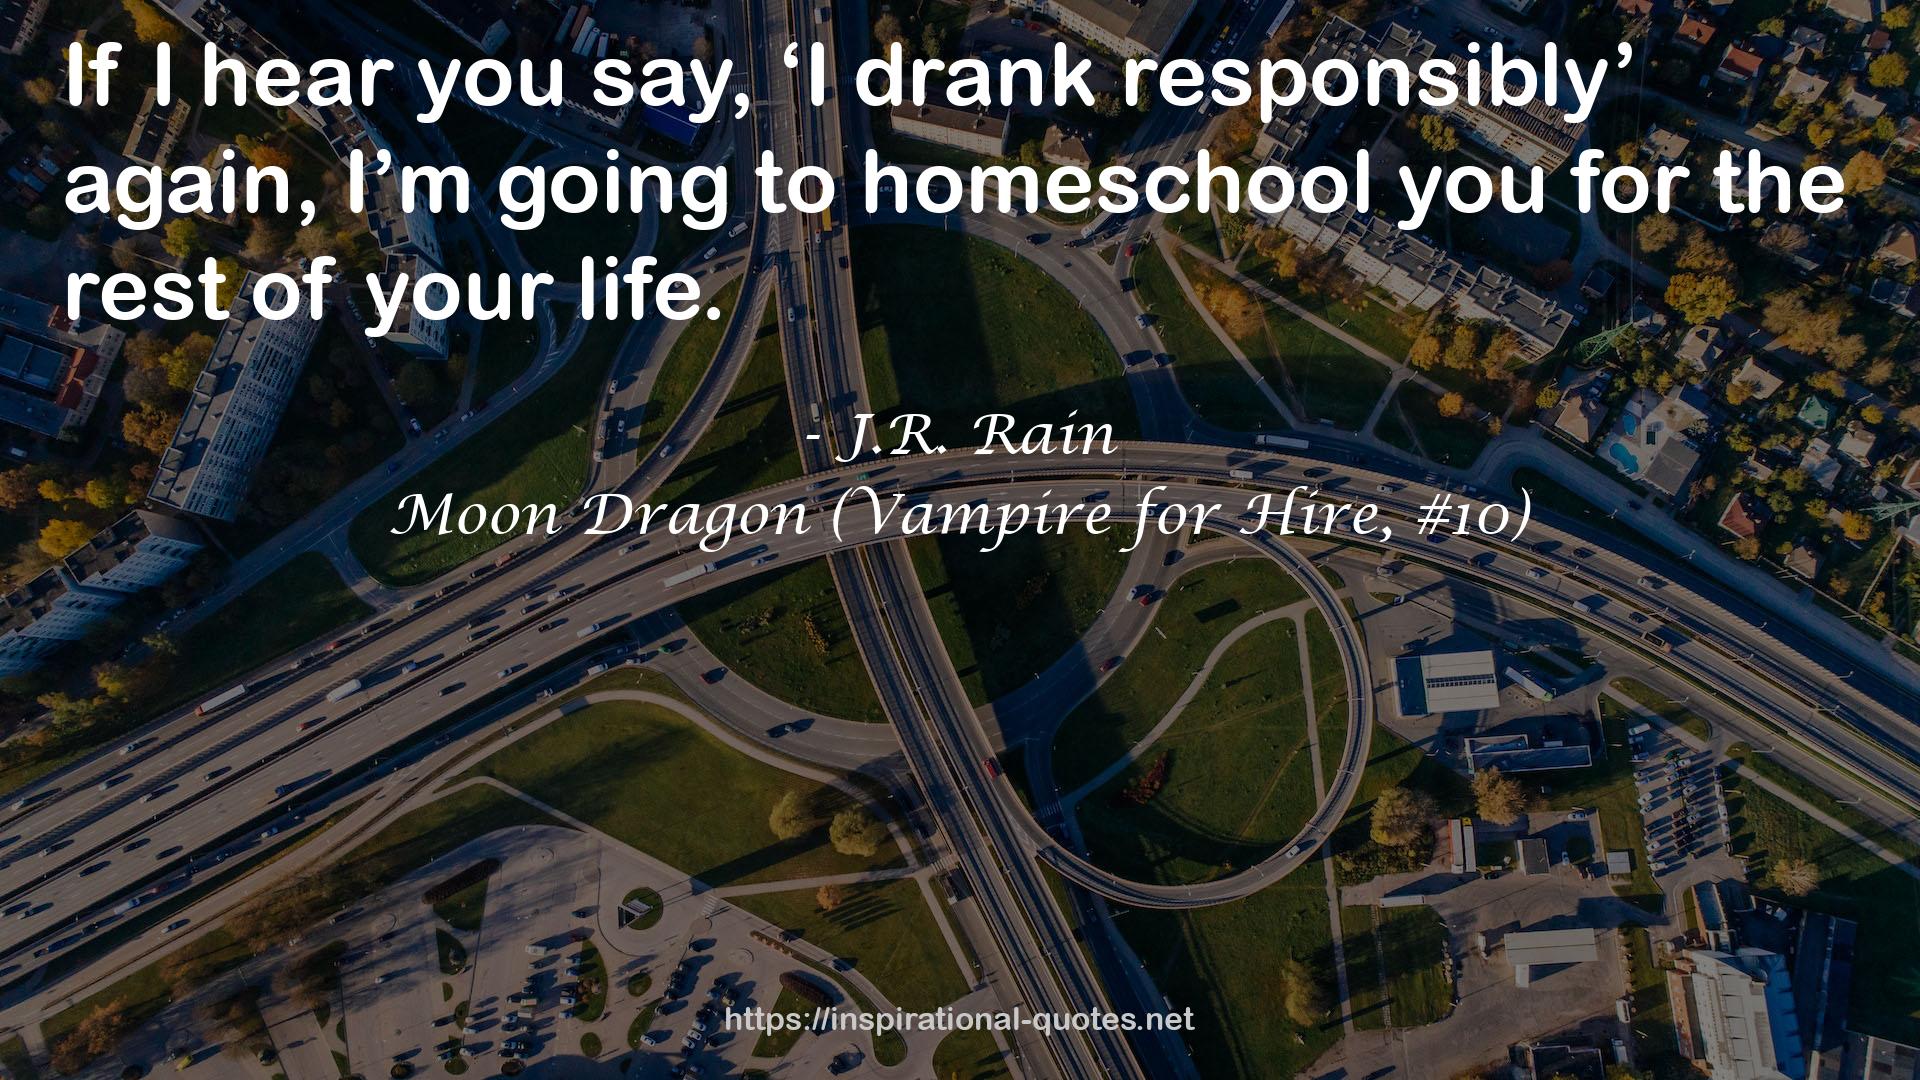 Moon Dragon (Vampire for Hire, #10) QUOTES